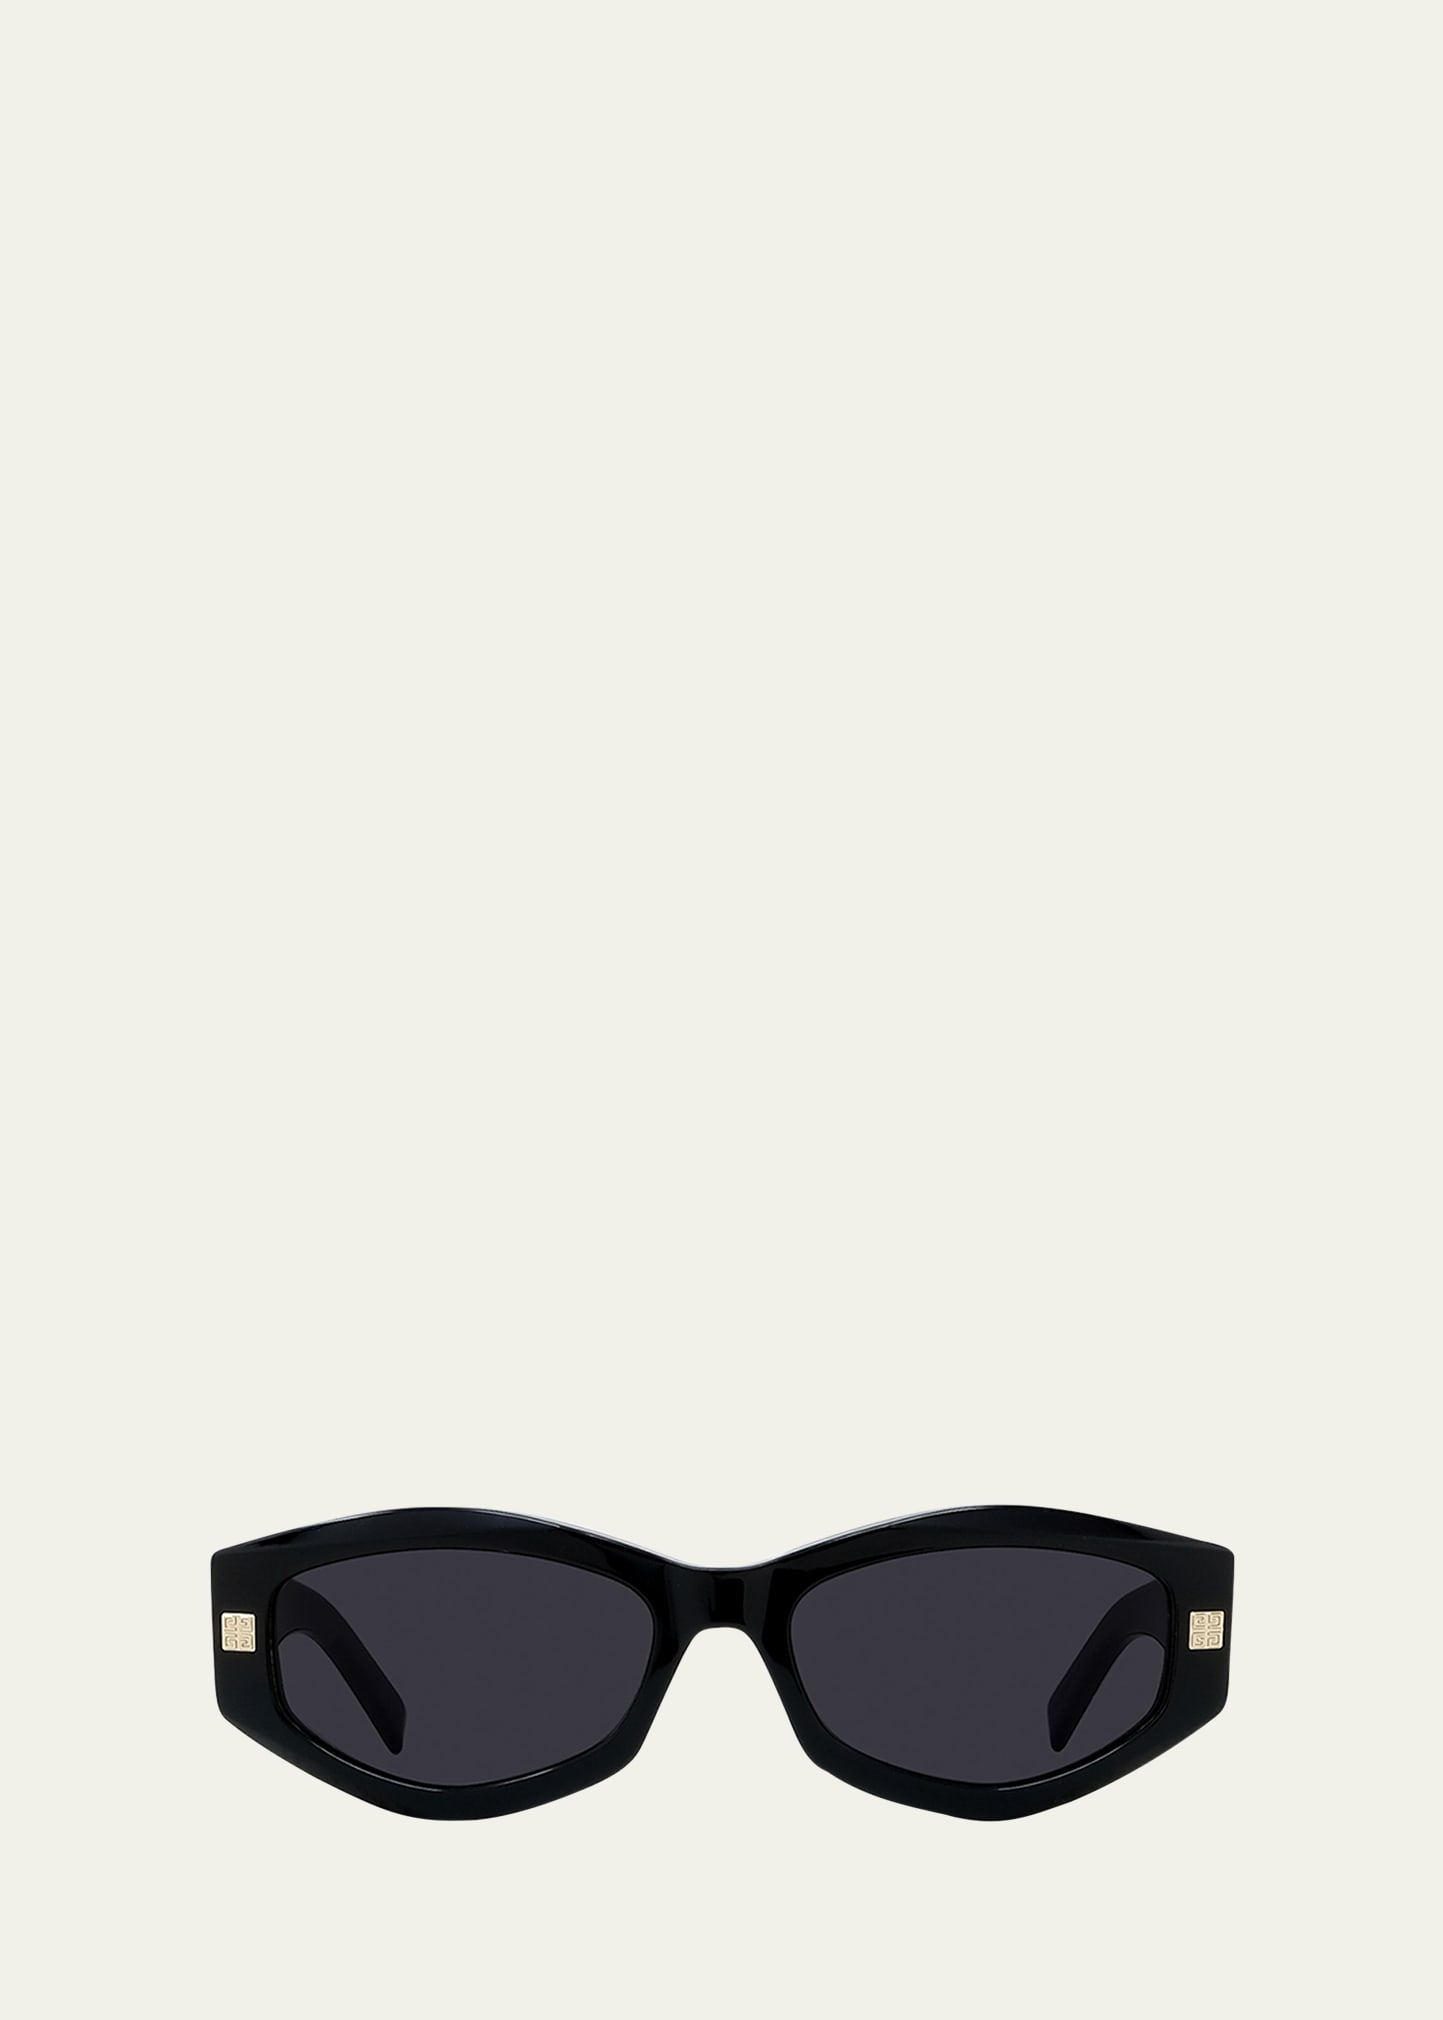 GIVENCHY GV DAY GEOMETRIC ACETATE OVAL SUNGLASSES